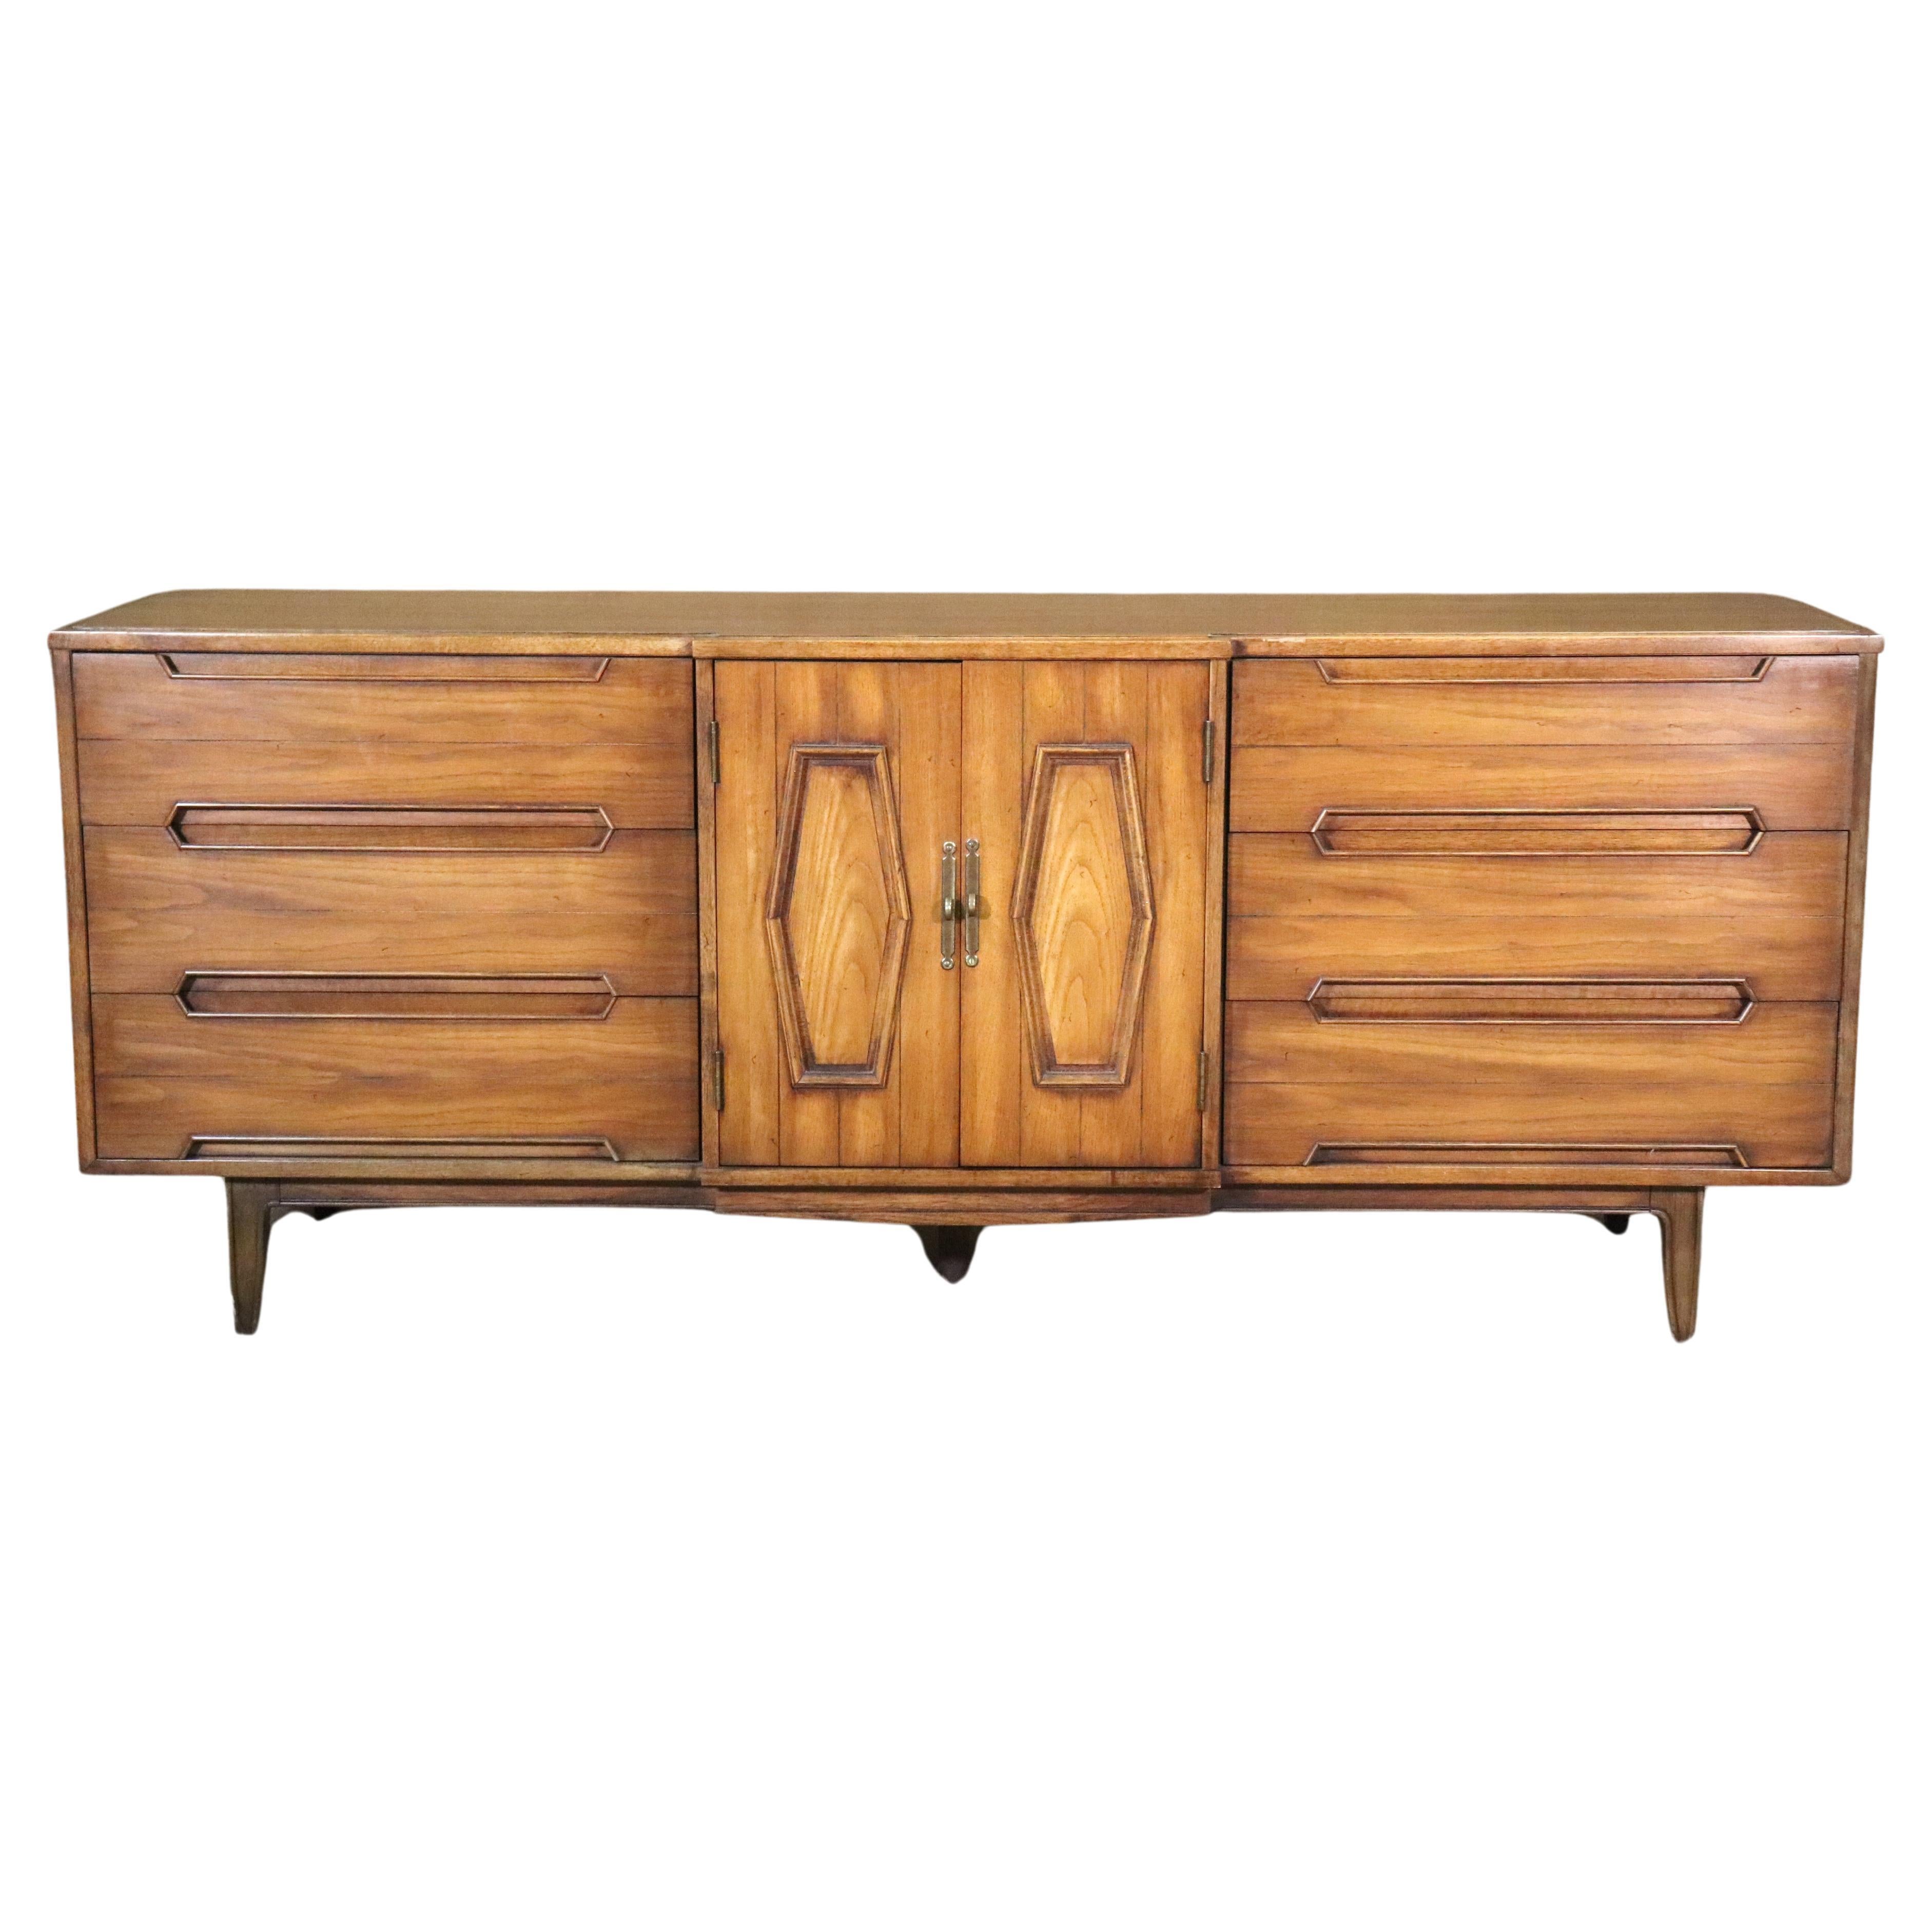 'Omega' Series Dresser by Thomasville For Sale